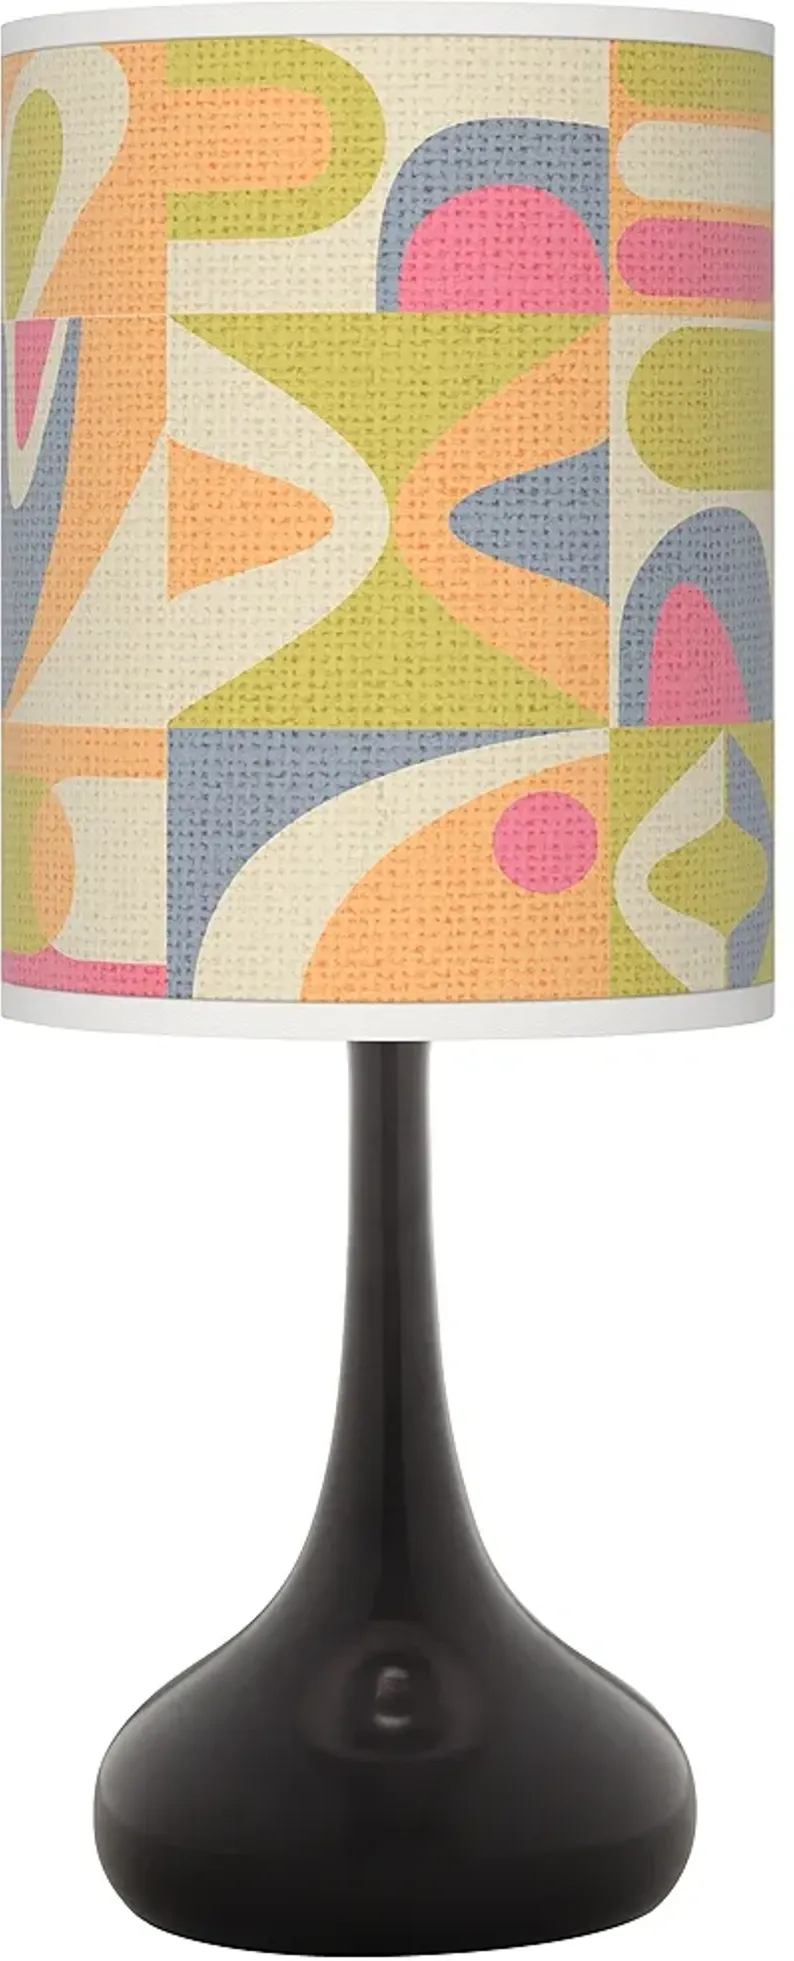 Modern Droplet Black Finish Table Lamp with Locomotion Print Shade